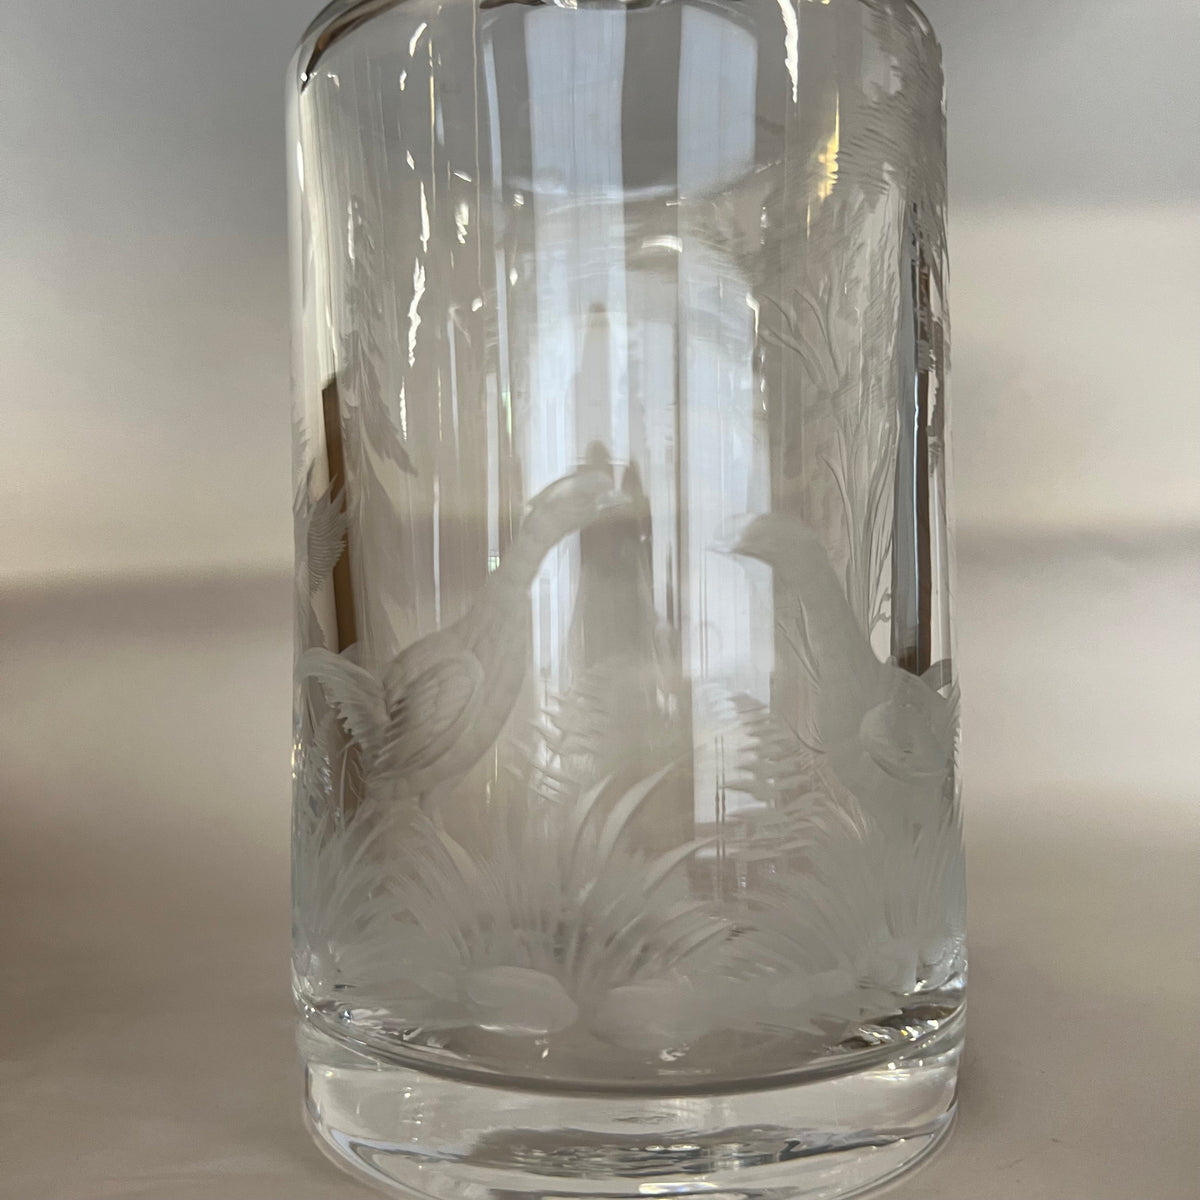 Vintage Queen's Lace Crystal Decanter with Lovely Etchings